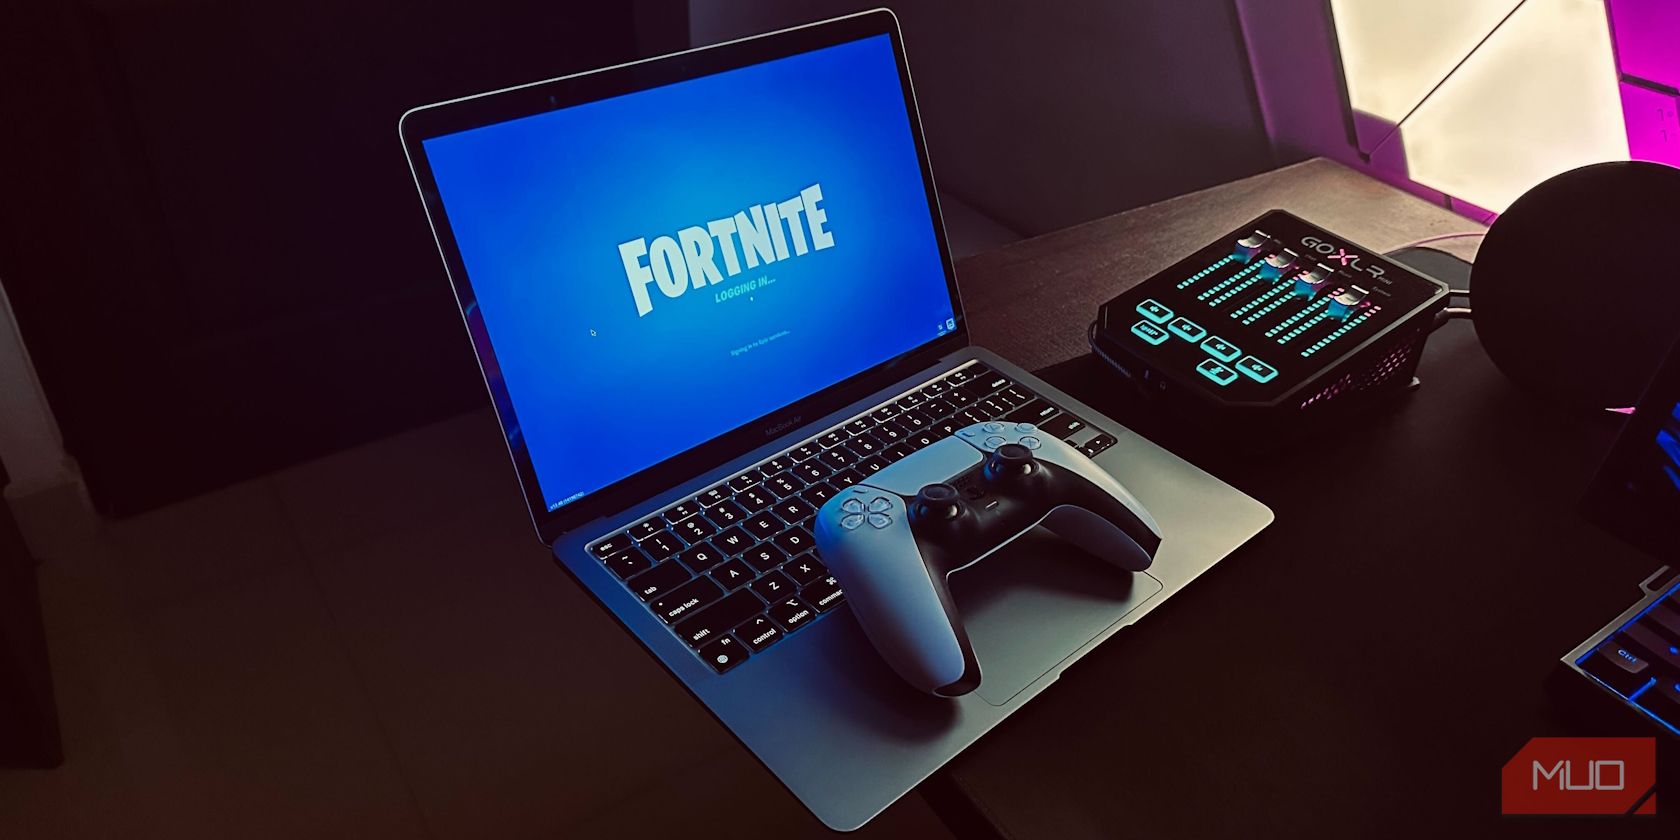 Fortnite running on a MacBook Air with a PS5 controller on top of it